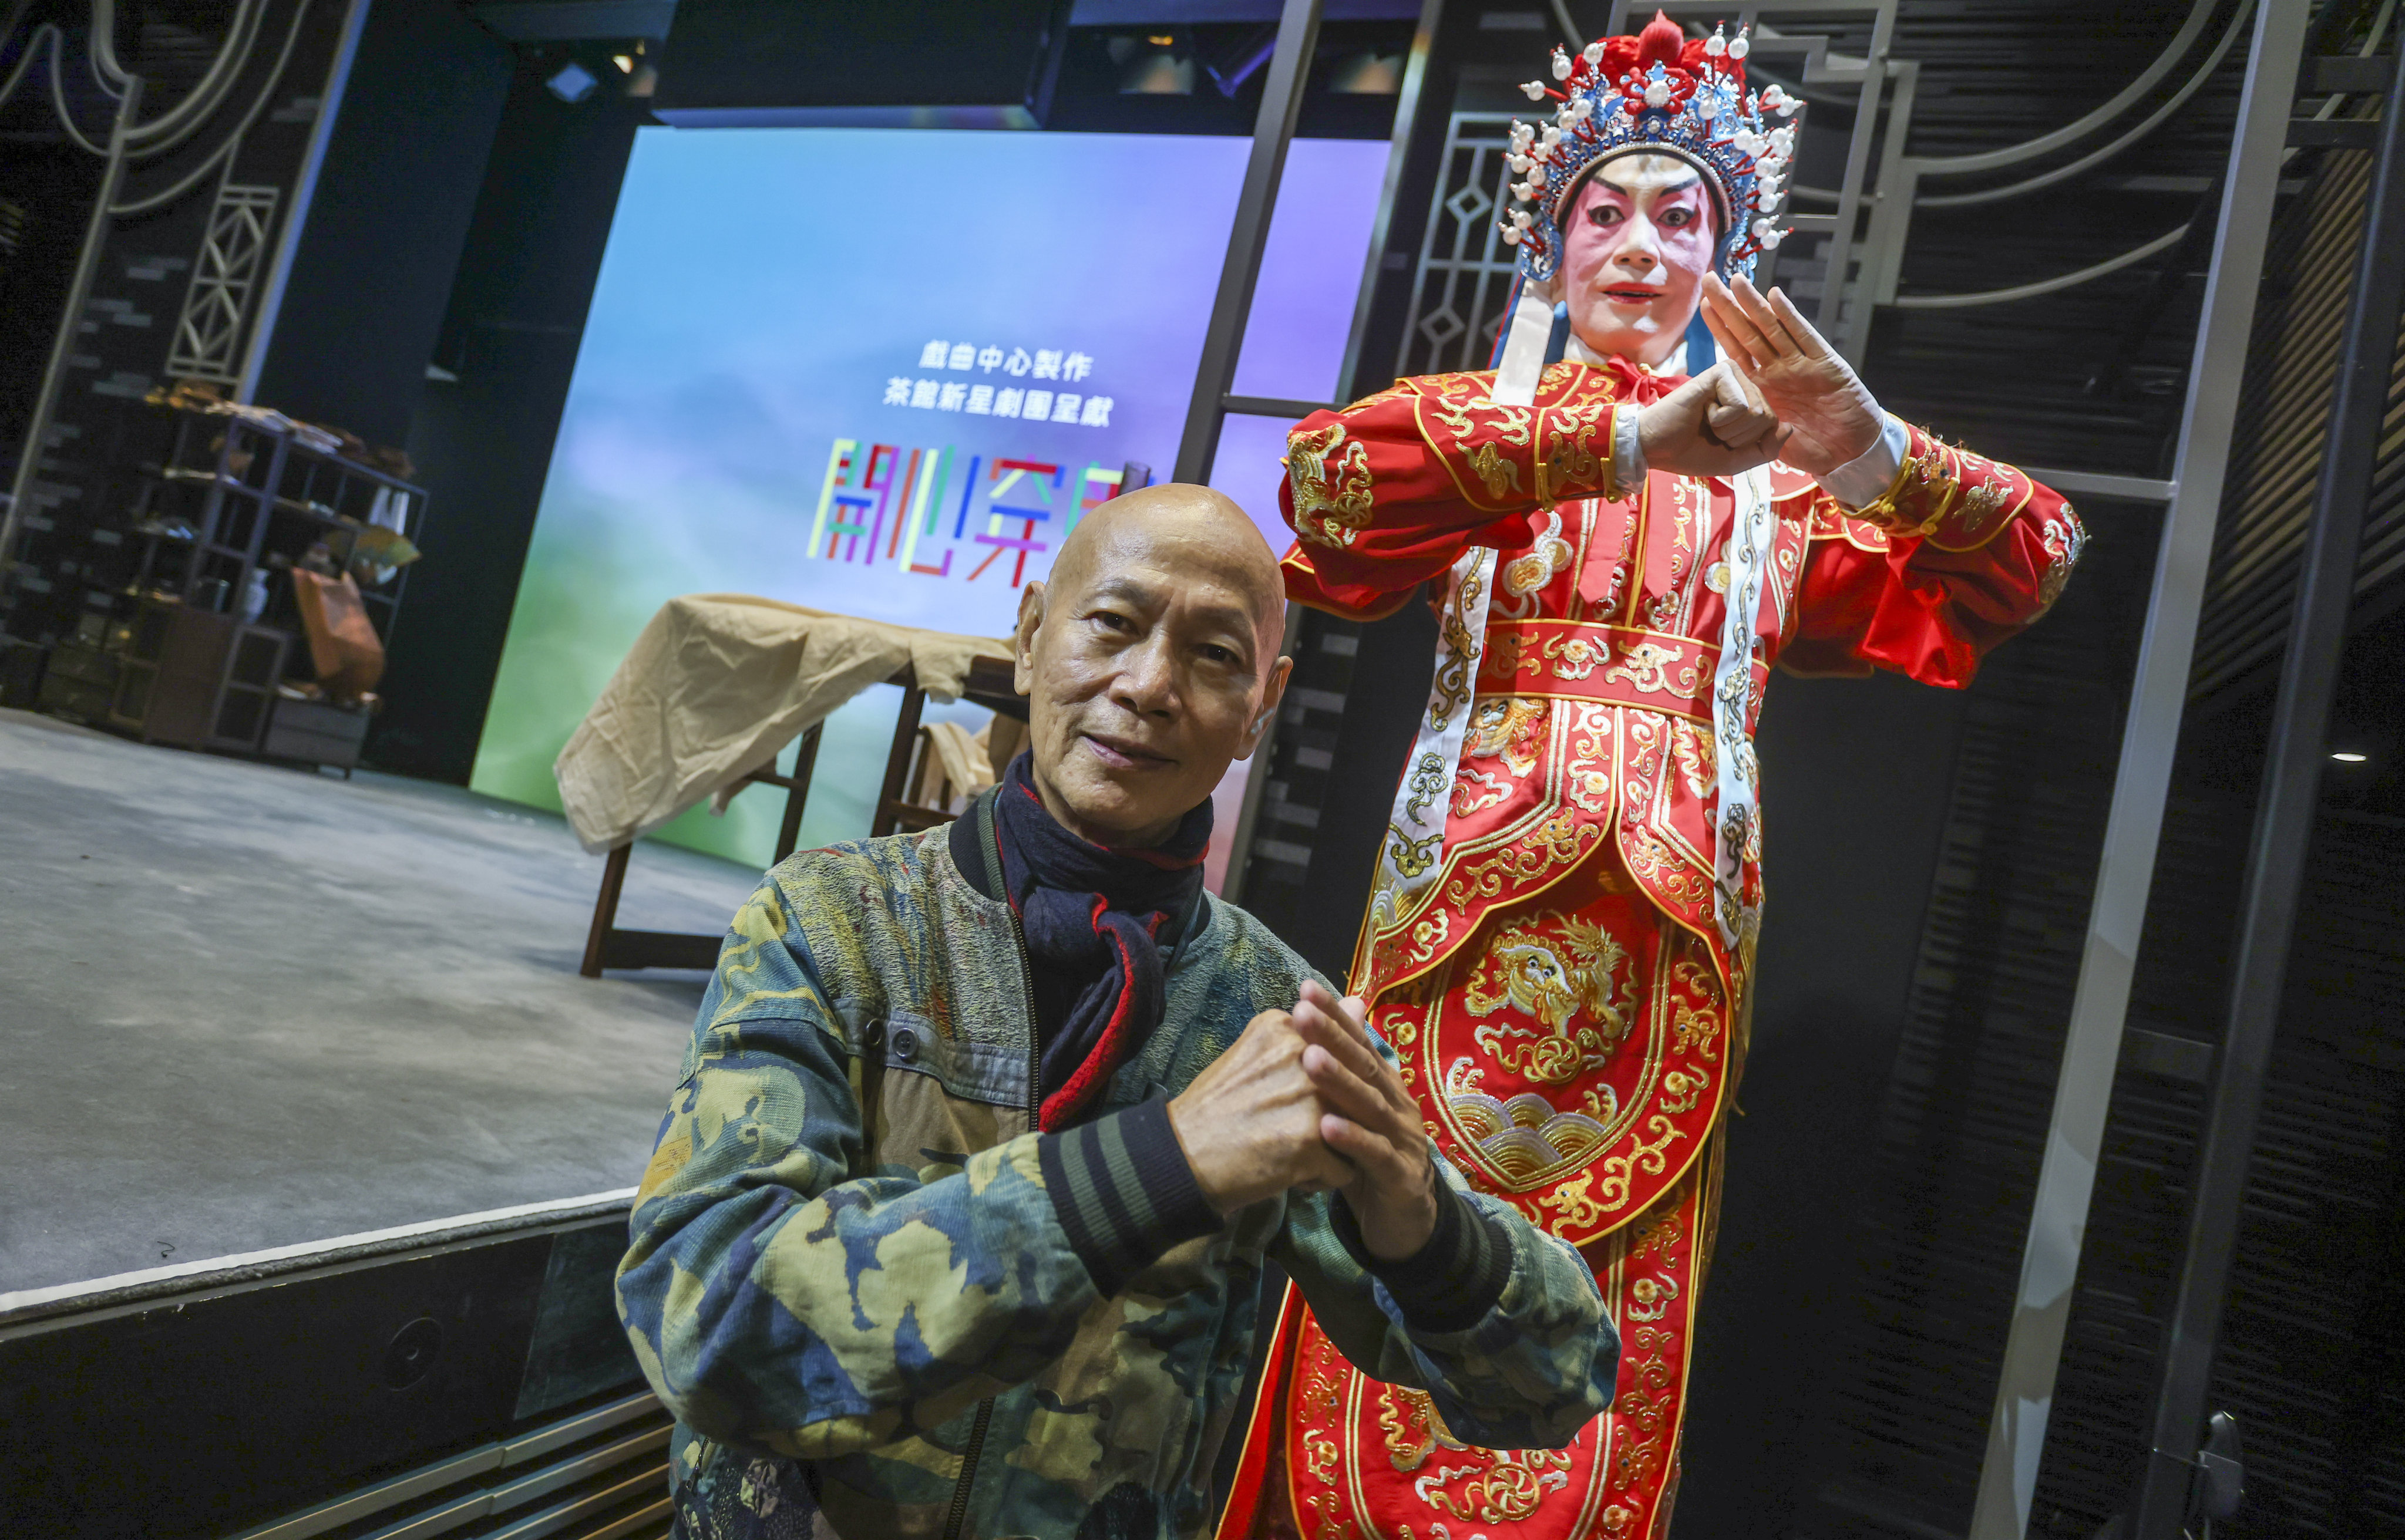 Cantonese opera singer Law Kar-ying with an AI robot of himself, at the Magic Tea House dress rehearsals at Xiqu Centre in West Kowloon on August 9. This is the city’s first Cantonese opera featuring AI and robotics. Arts organisations should provide more chances for cross-disciplinary collaboration. Photo: Jonathan Wong